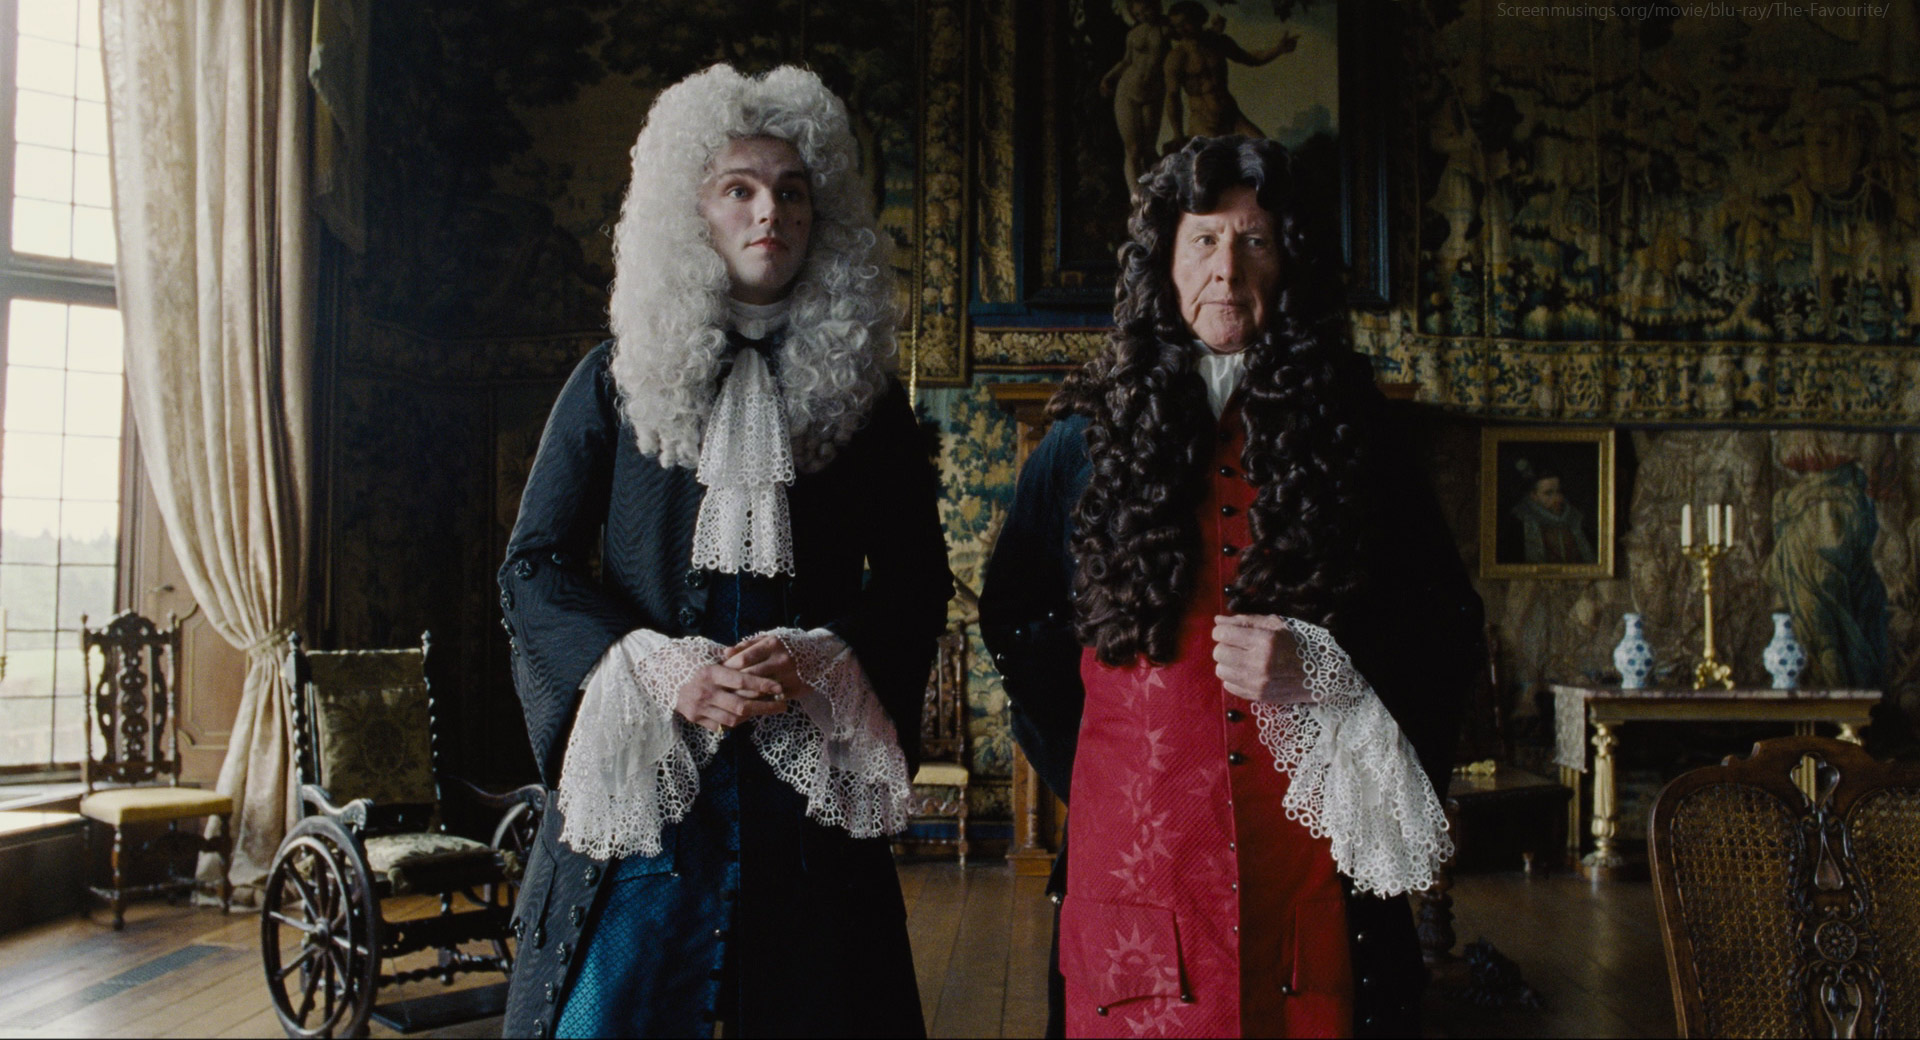 https://screenmusings.org/movie/blu-ray/The-Favourite/images/The-Favourite-337.jpg